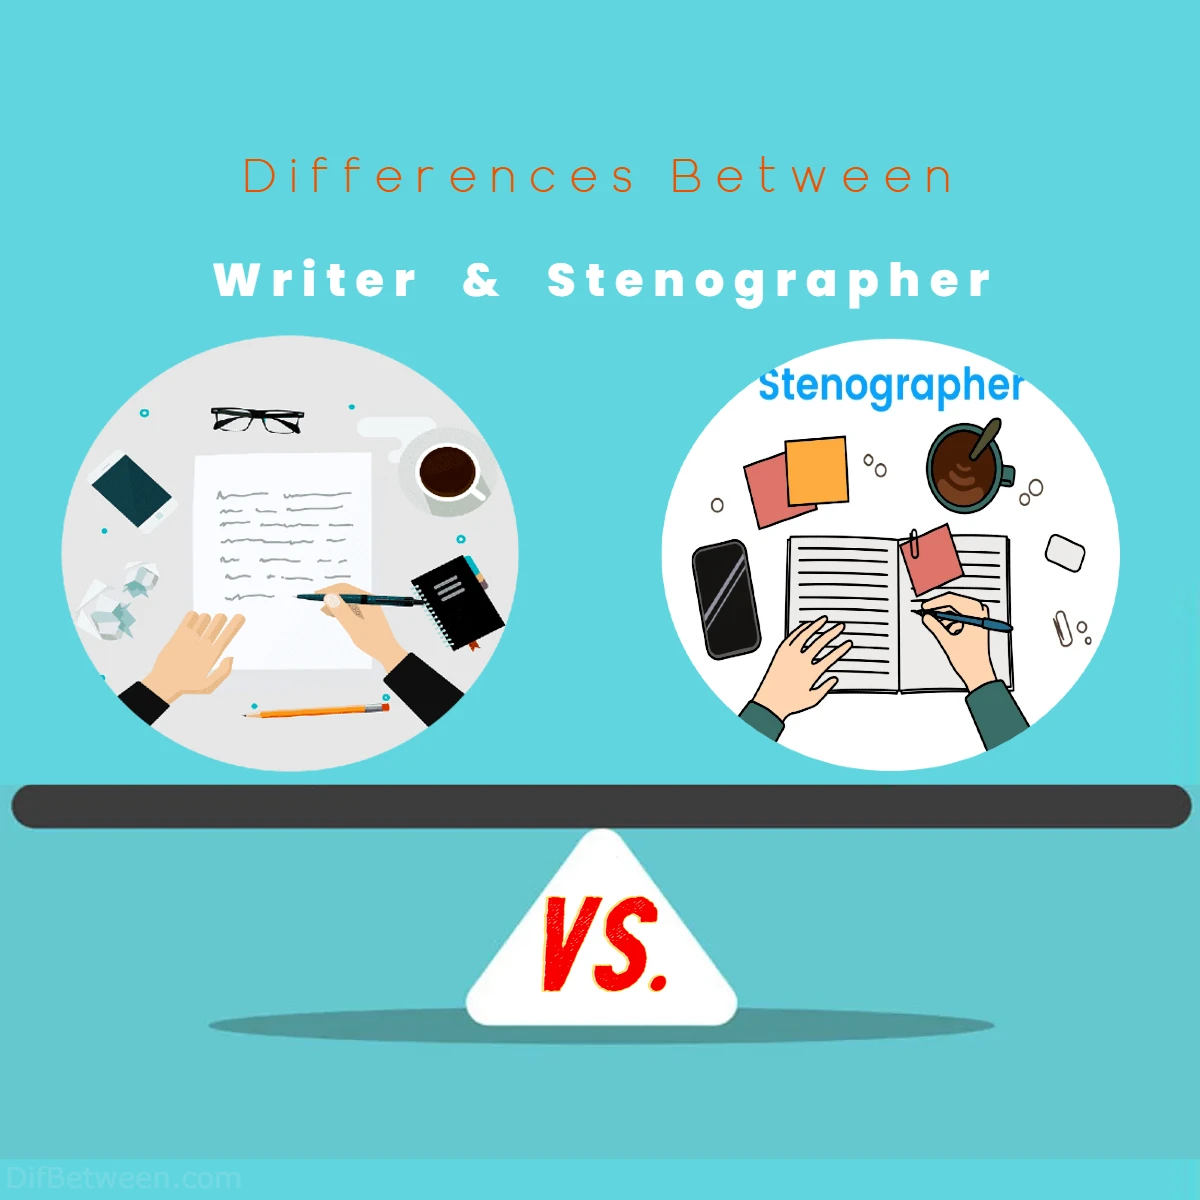 Differences Between Writer vs Stenographer